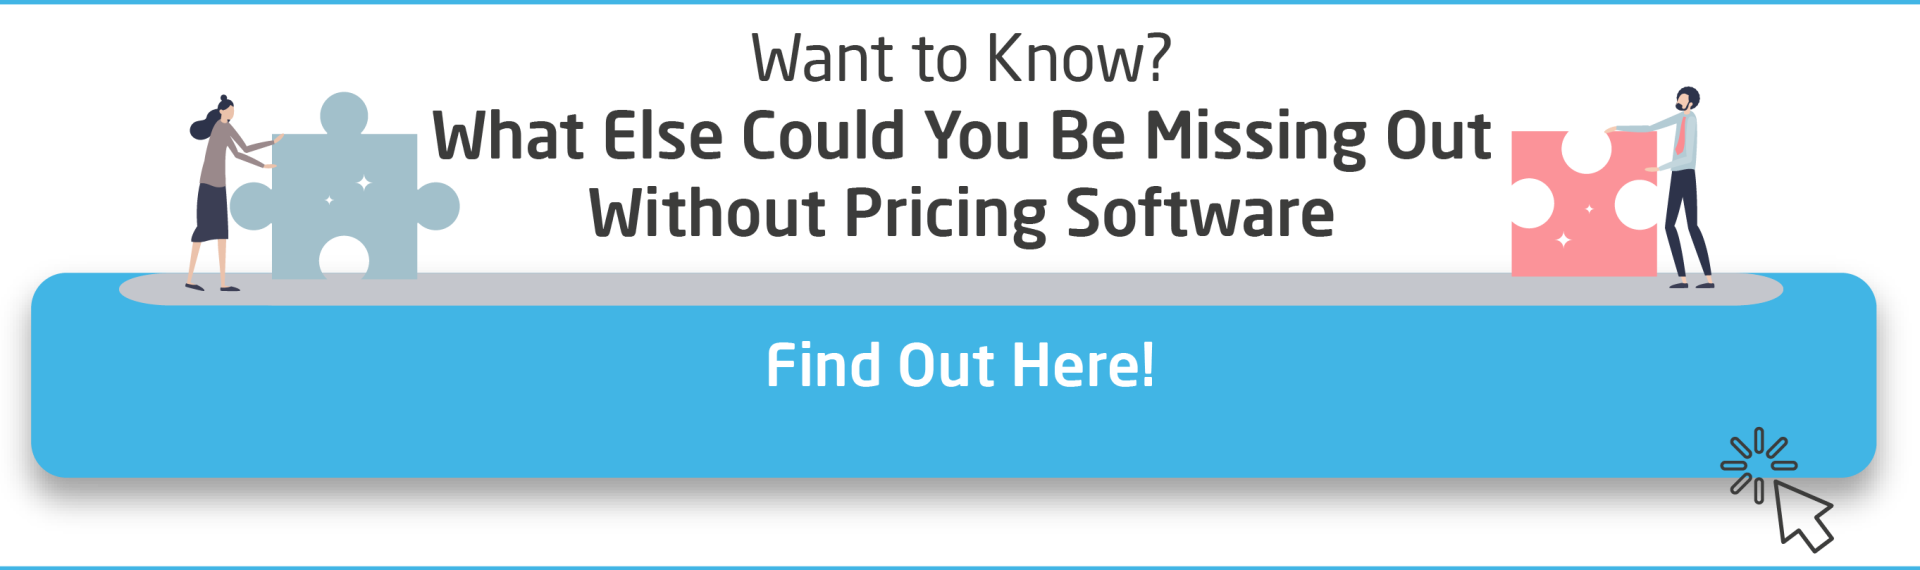 CTA-What-Else-Could-You-Be-Missing-Out-on-Without-Pricing-Software